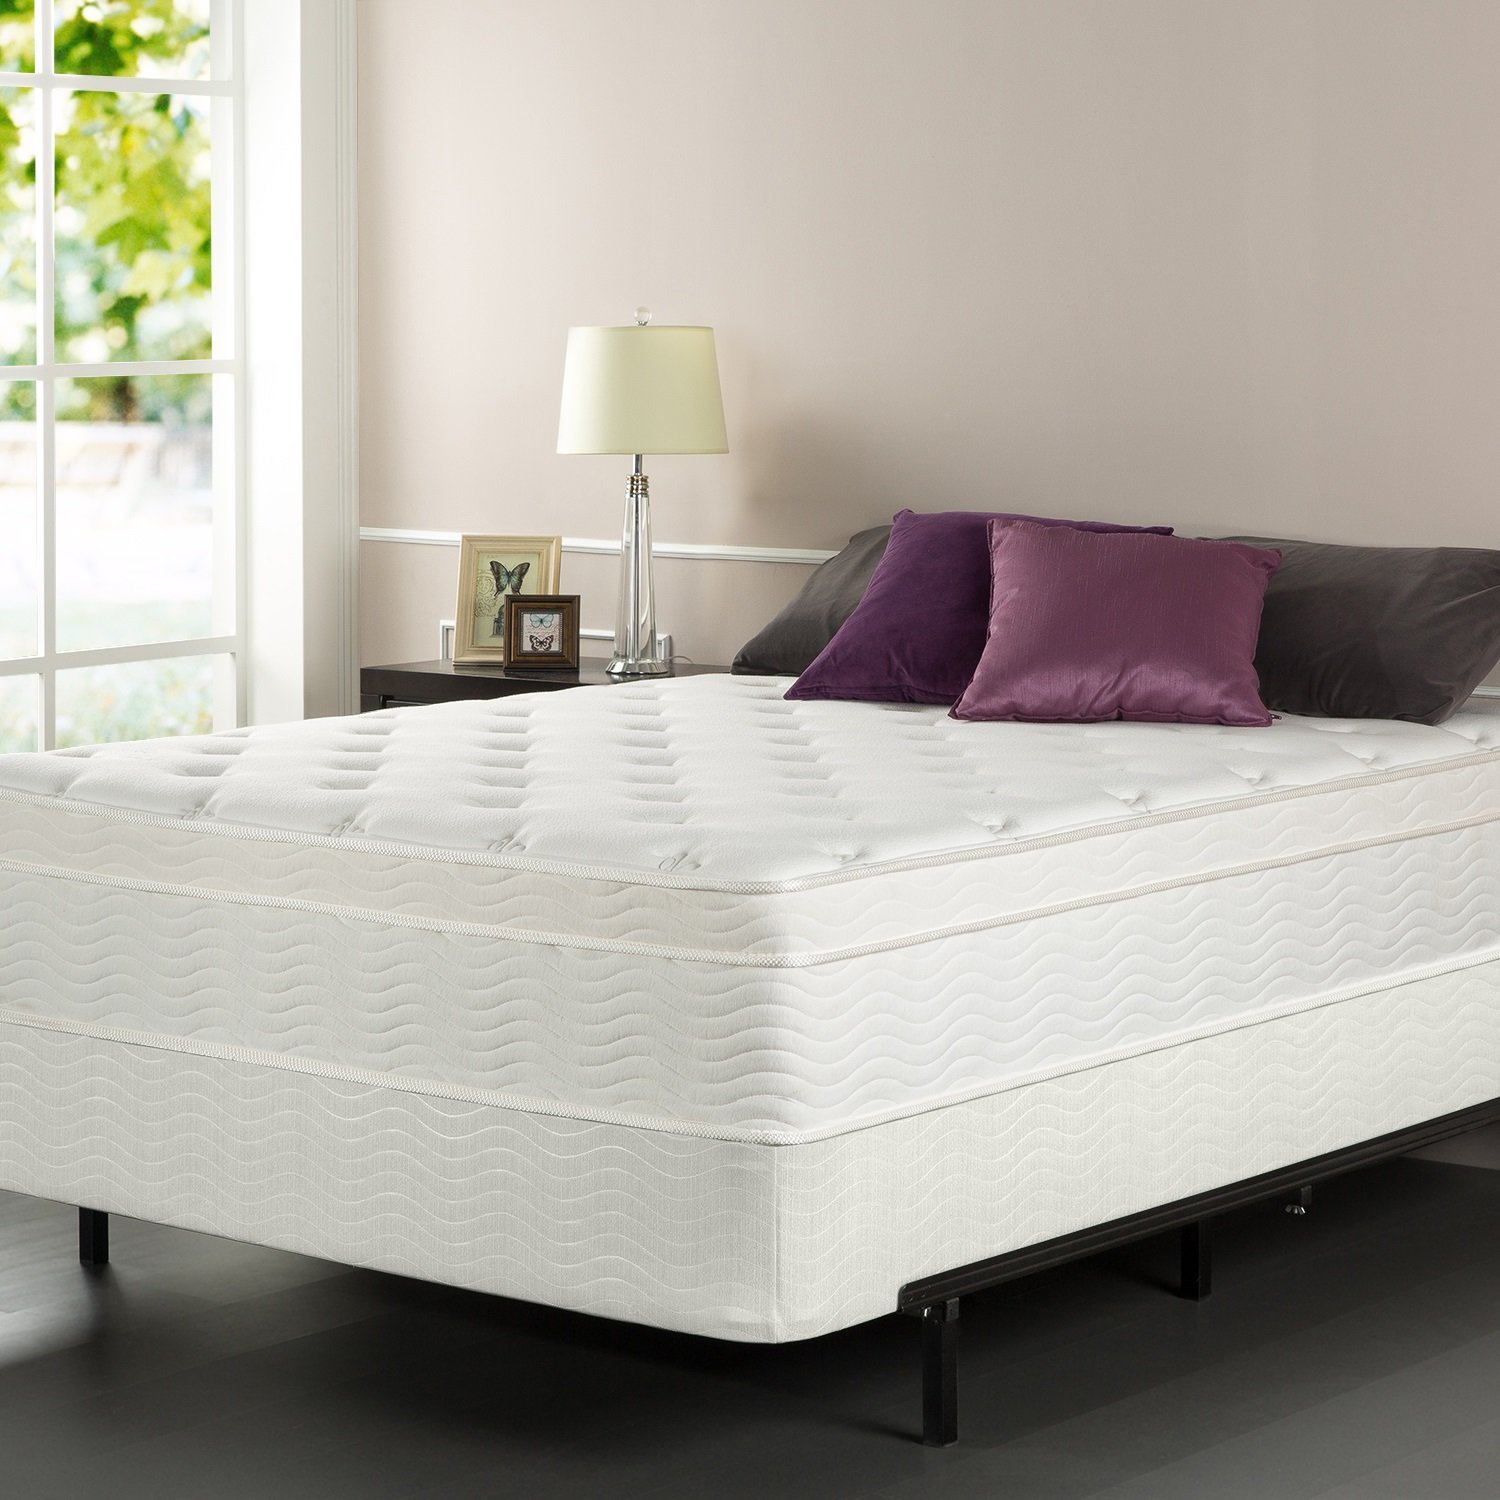 Top 10 Best King Size Mattresses in 2018